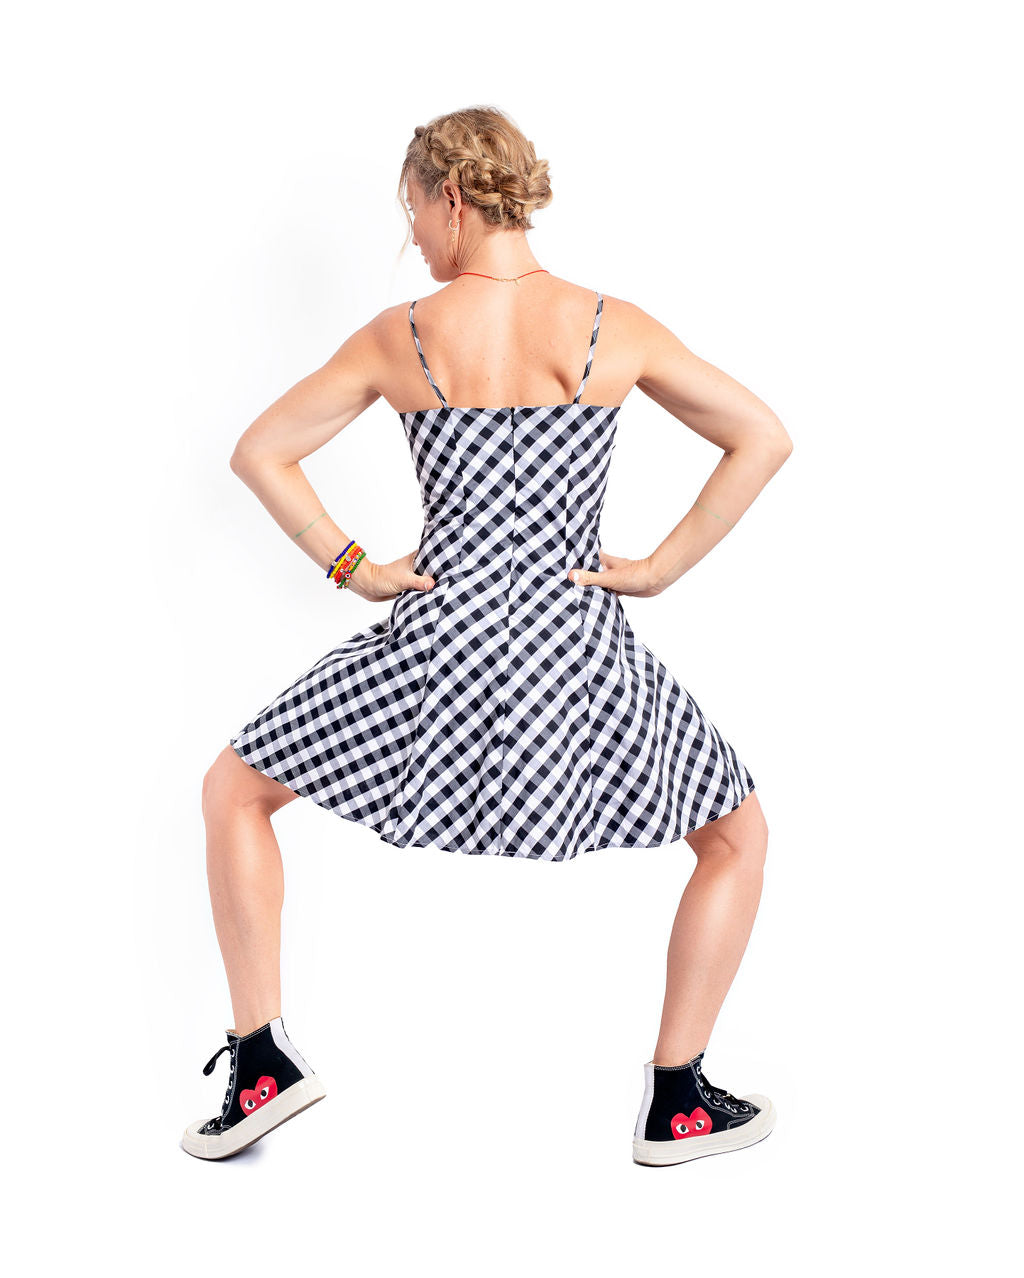 Gingham Skater Dress - The Skater Dress is full of tricks — a silhouette fit for cocktail parties, enough length to keep you covered when you’re catching air, and pockets. It’s fun to twirl in, too. What more does a skater girl (or skater girl at heart) need?